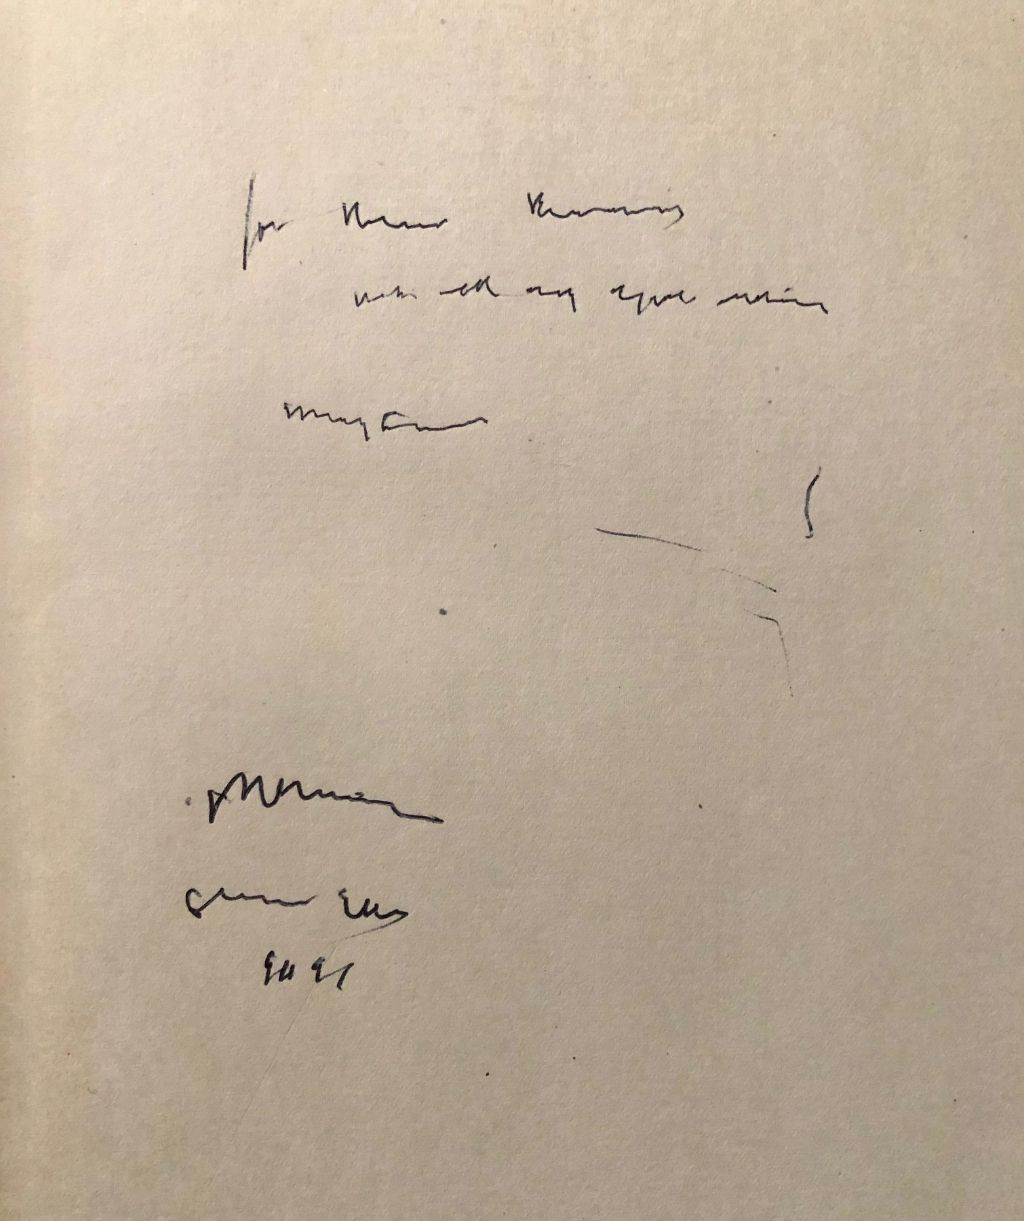 (Food Writing) Brillat-Savarin, Jean Anthelme. The Physiology of Taste or, Meditations on Transcendental Gastronomy. Trans. with preface by M.F.K. Fisher. SIGNED!